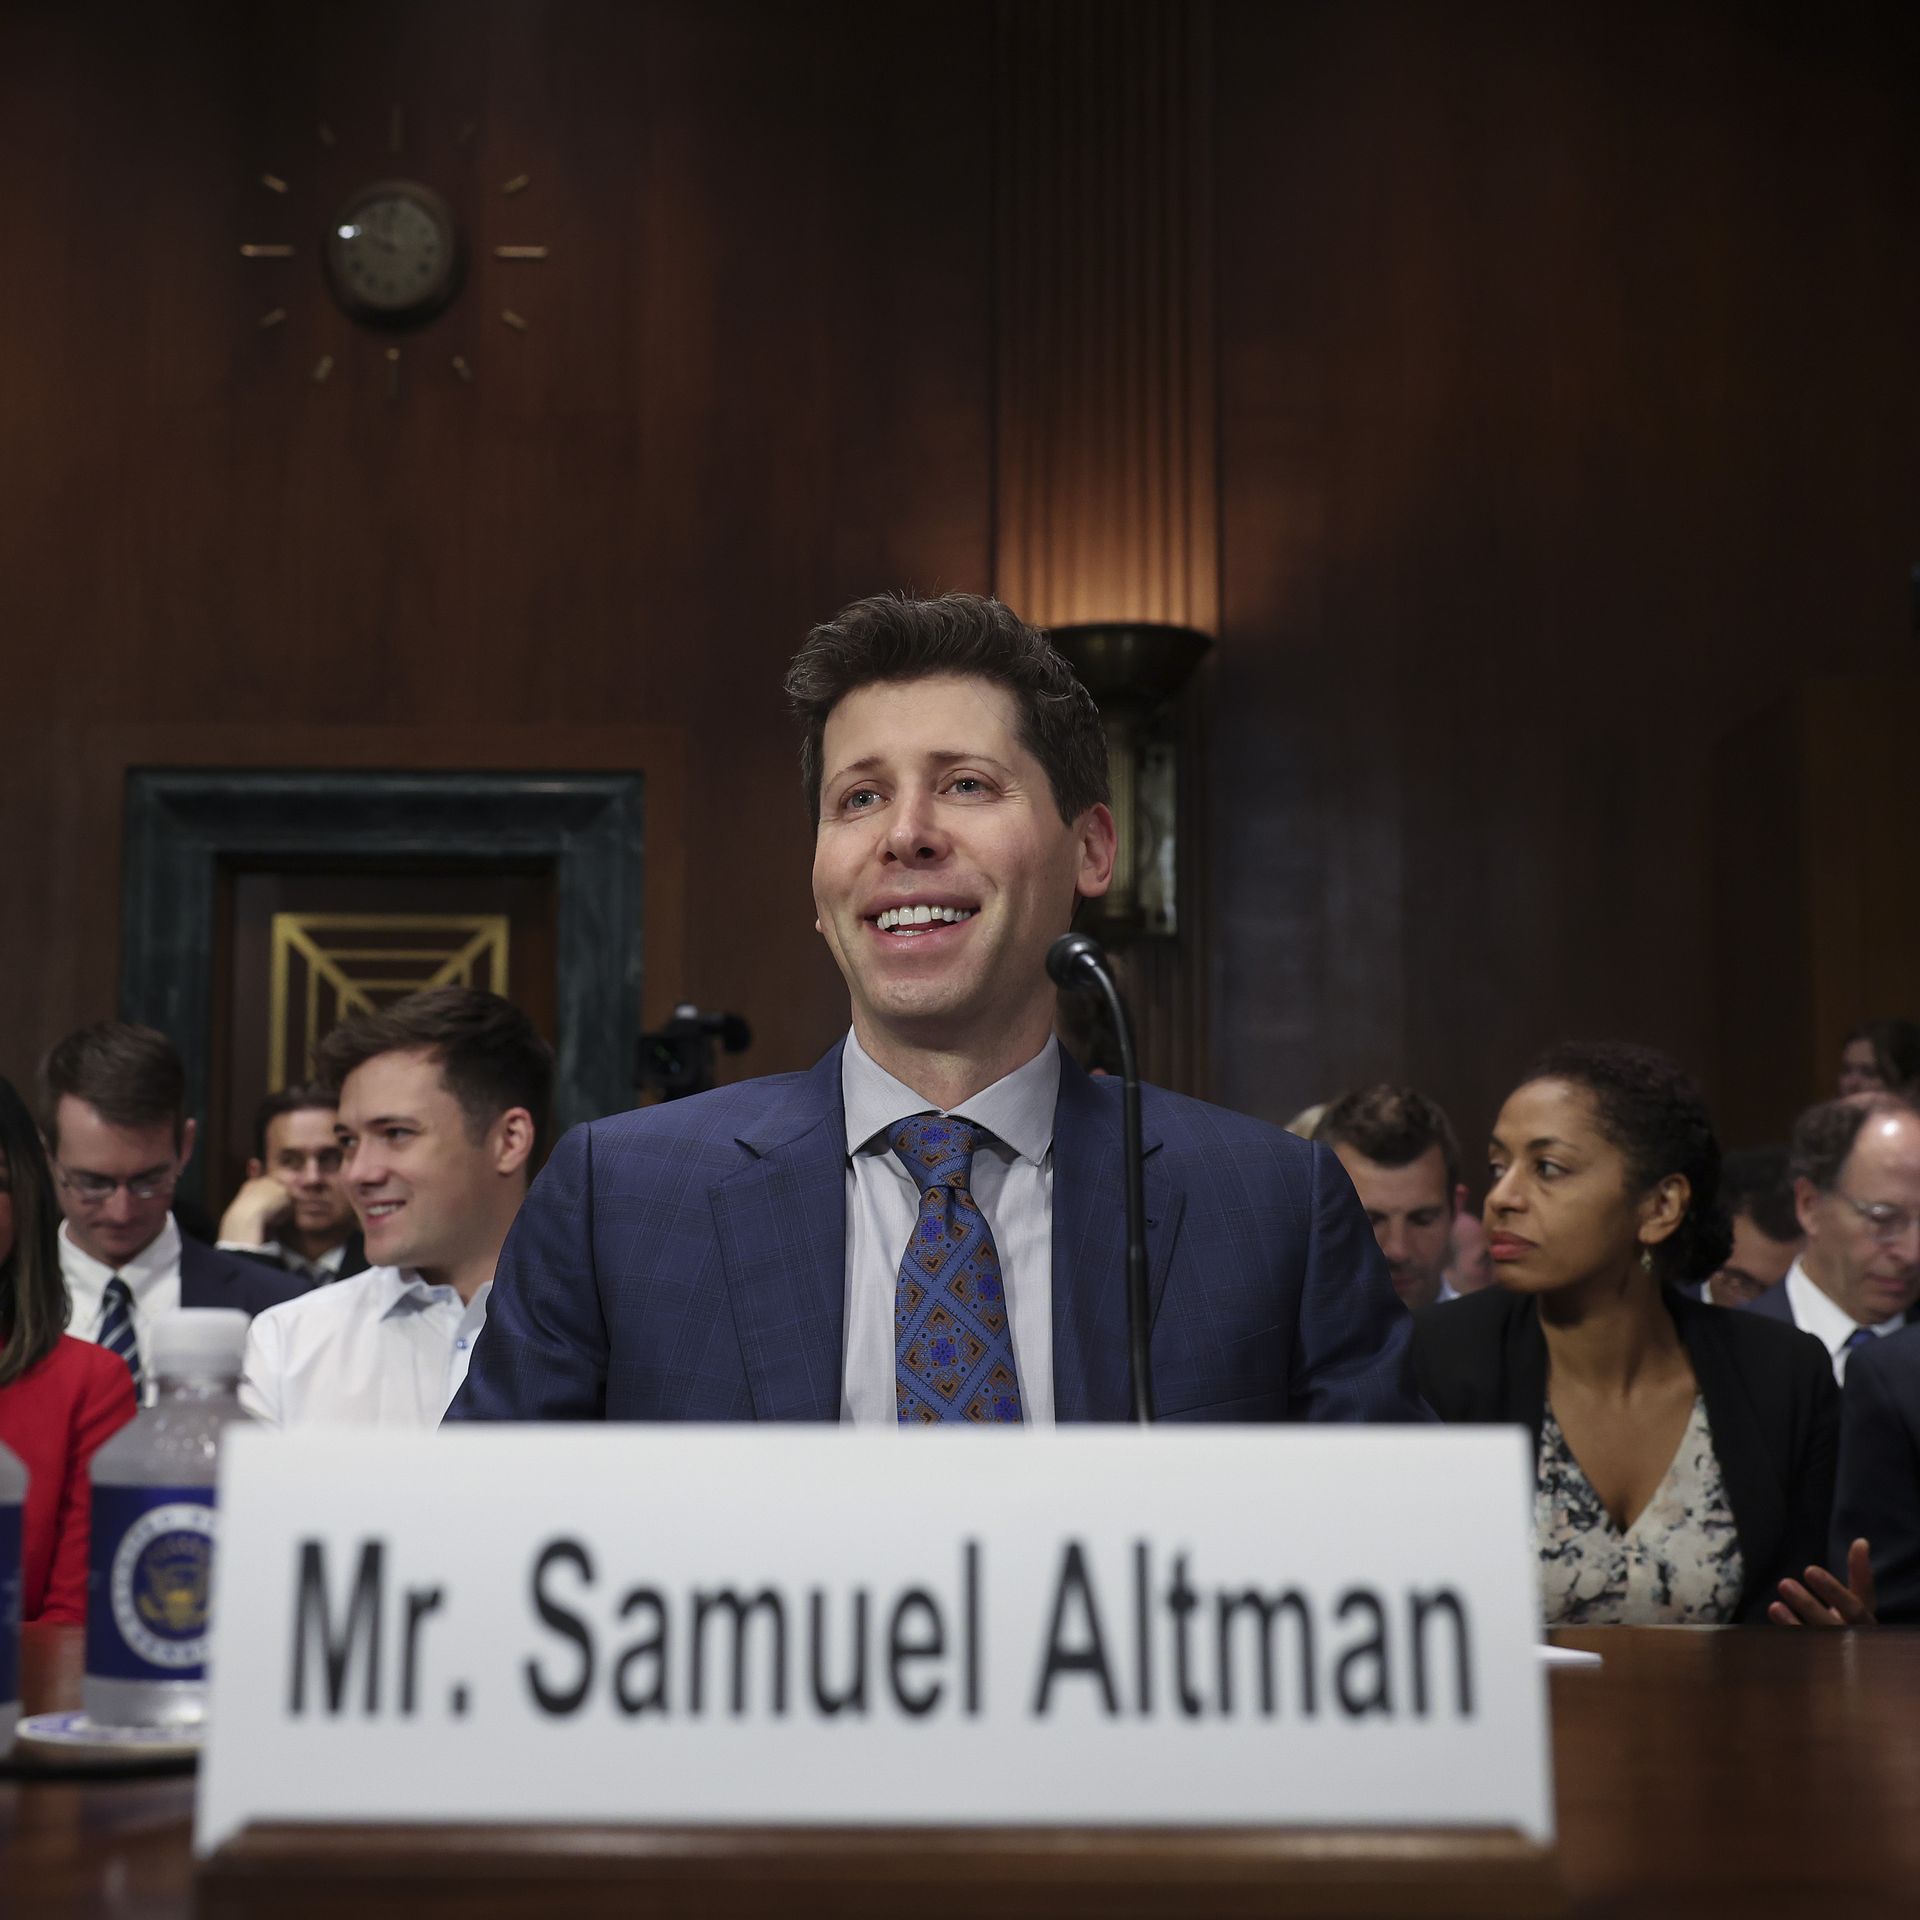 Photo of Sam Altman in suit and tie smiling, seated at testimony table, with a placard bearing his name